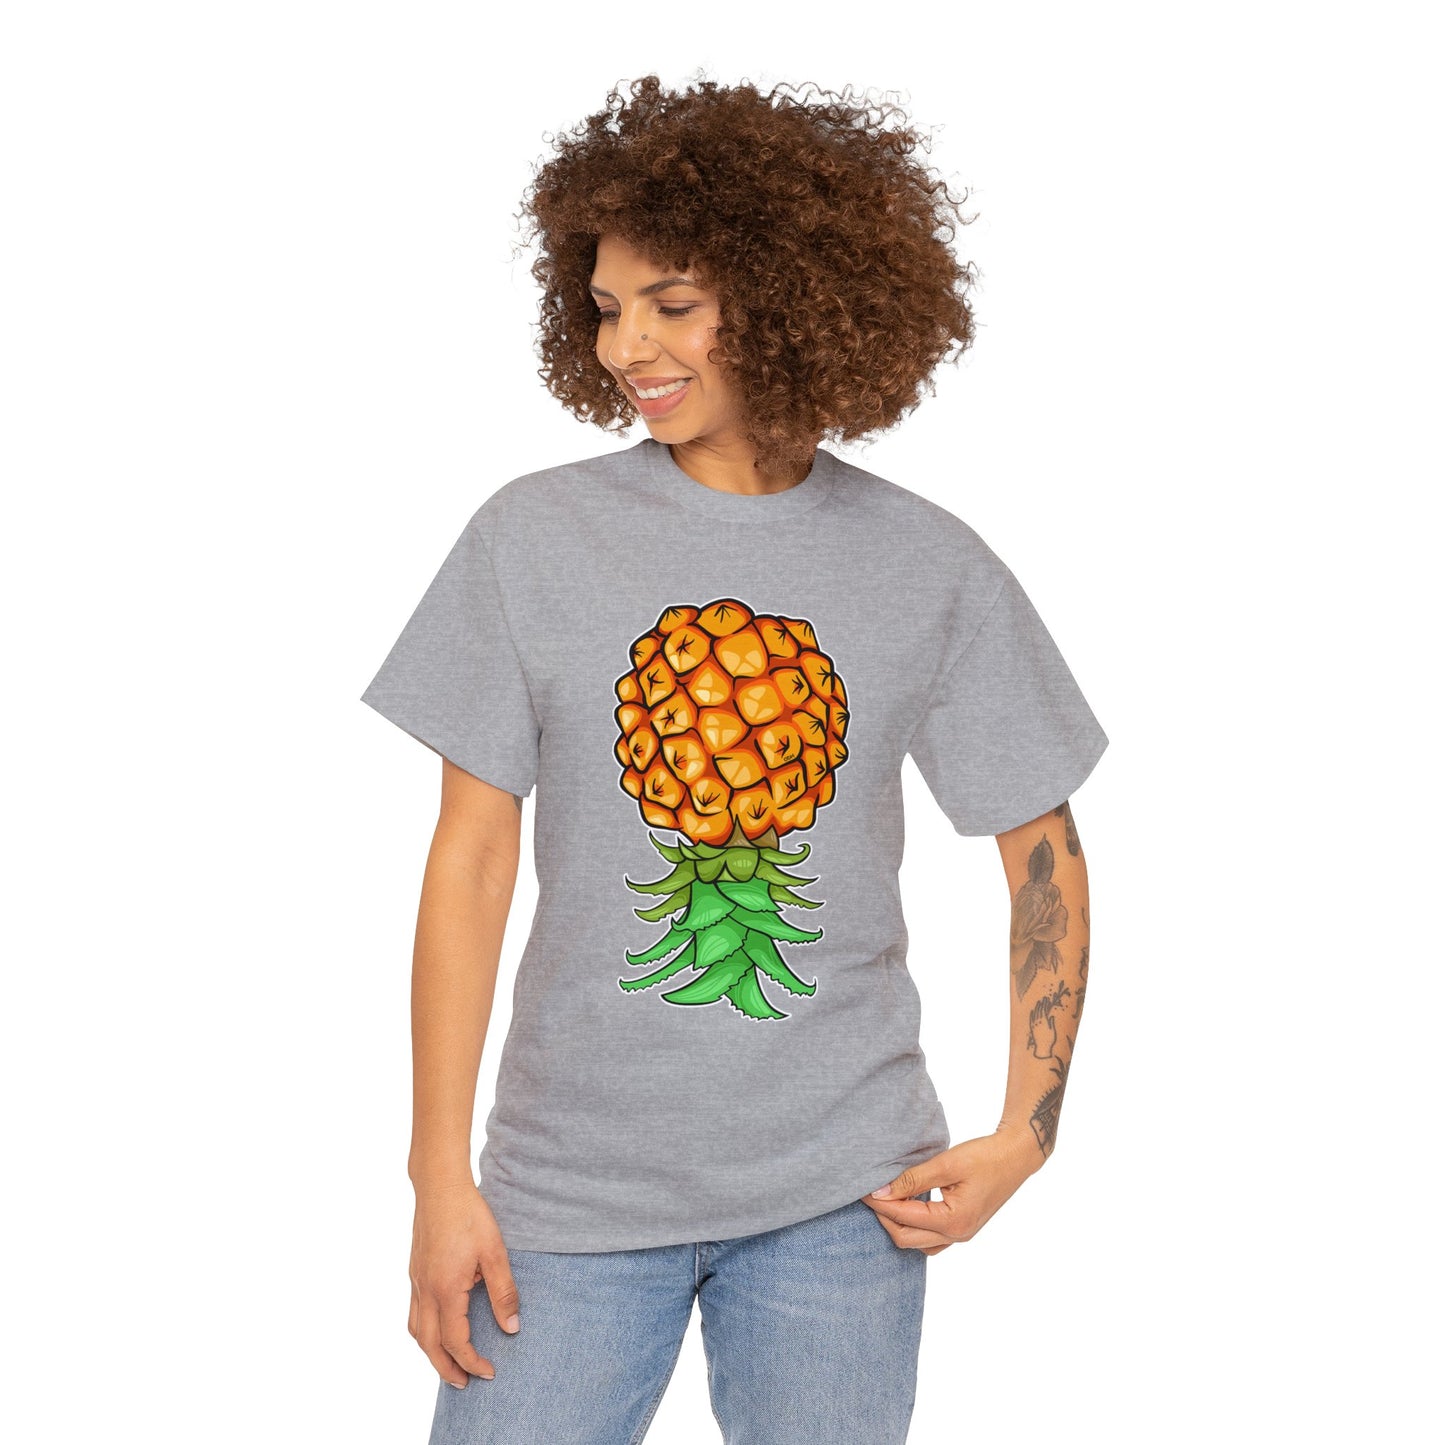 Upside Down Pineapple If You Know You Know